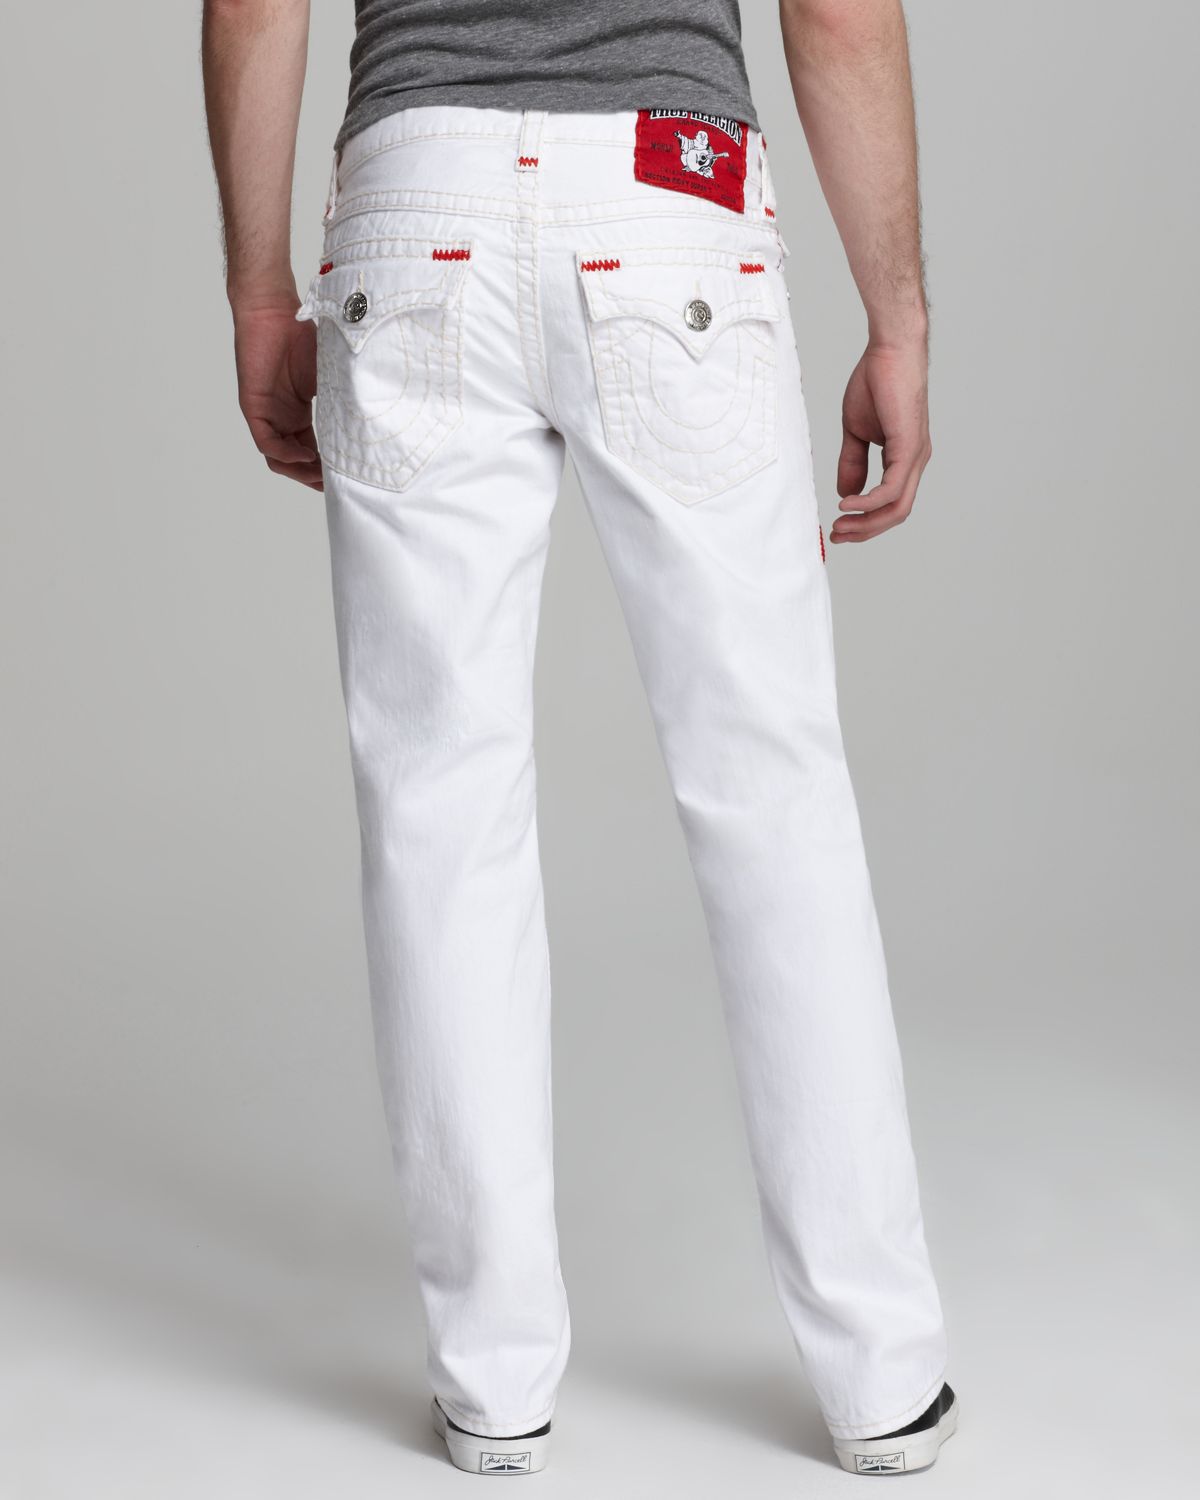 True Religion Jeans Ricky Super T Straight Fit in Optic White for Men - Lyst